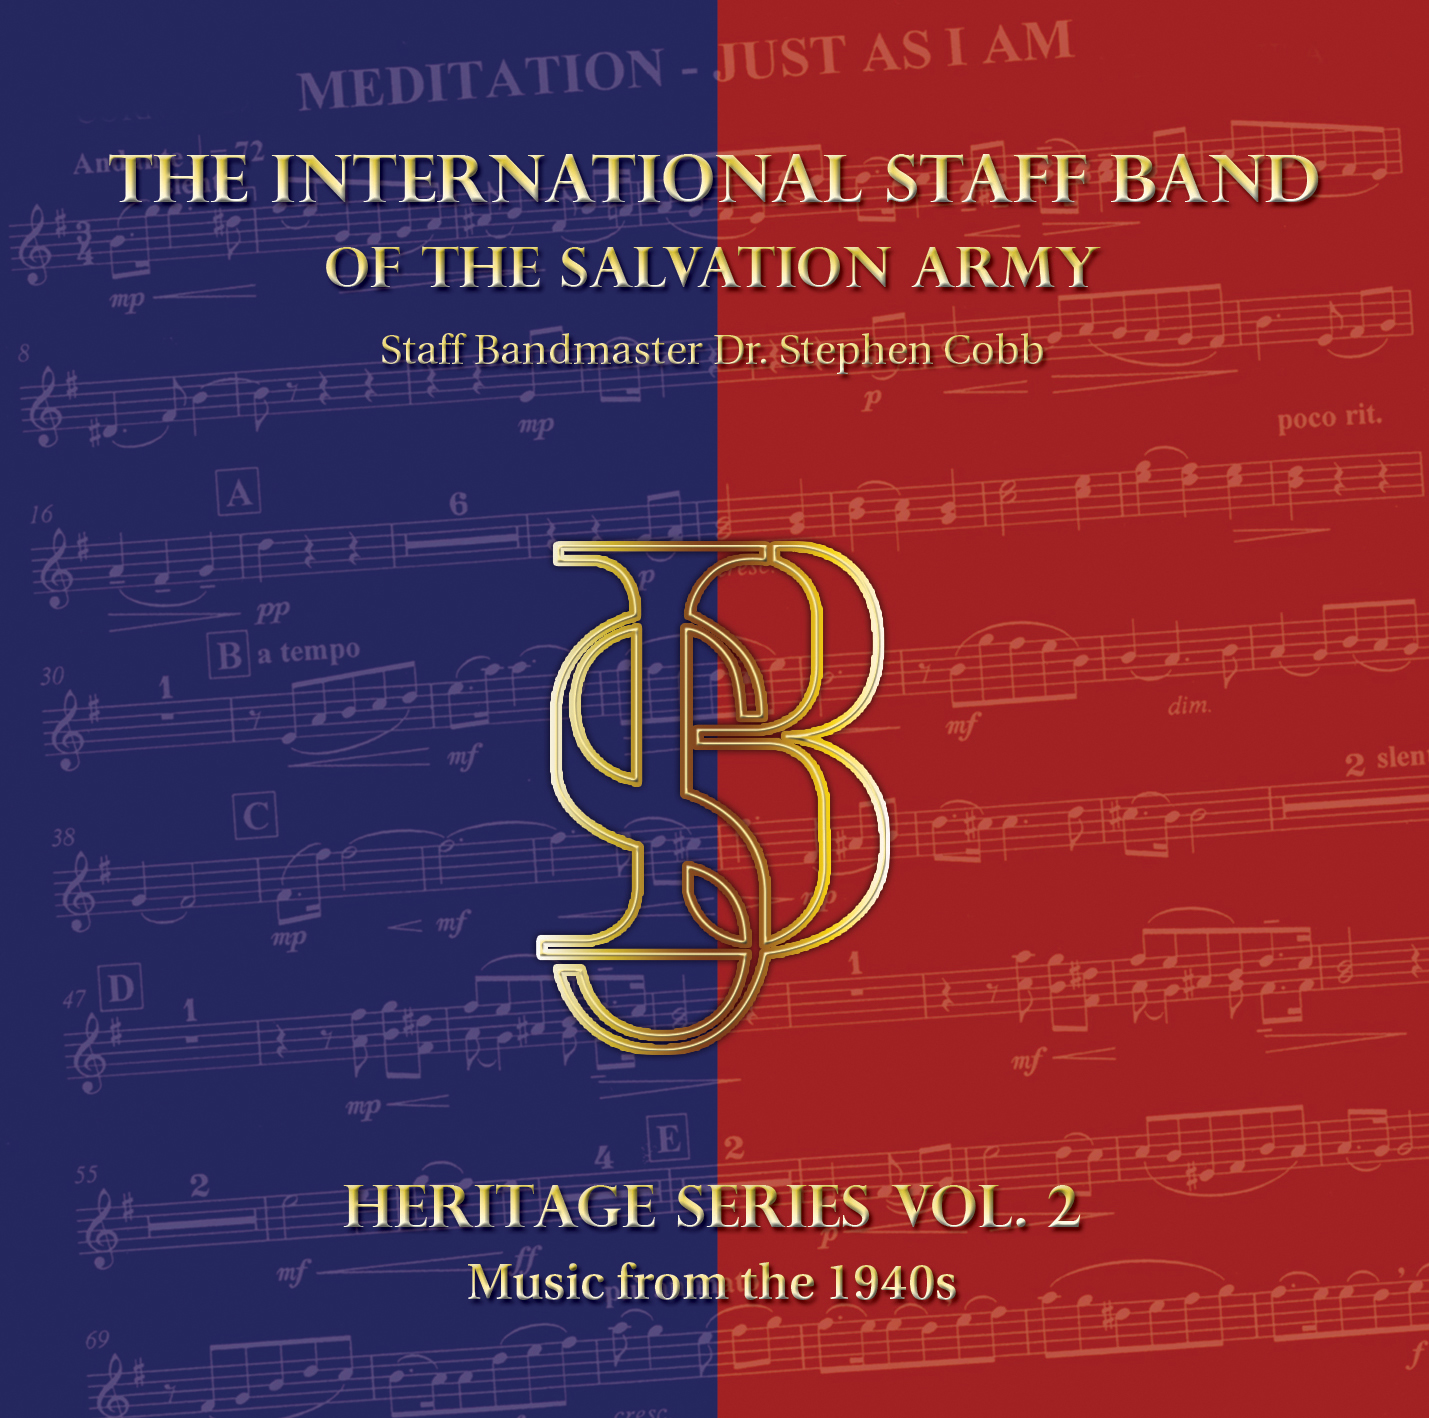 Heritage Series Vol. 2 - Music from the 1940s - Download